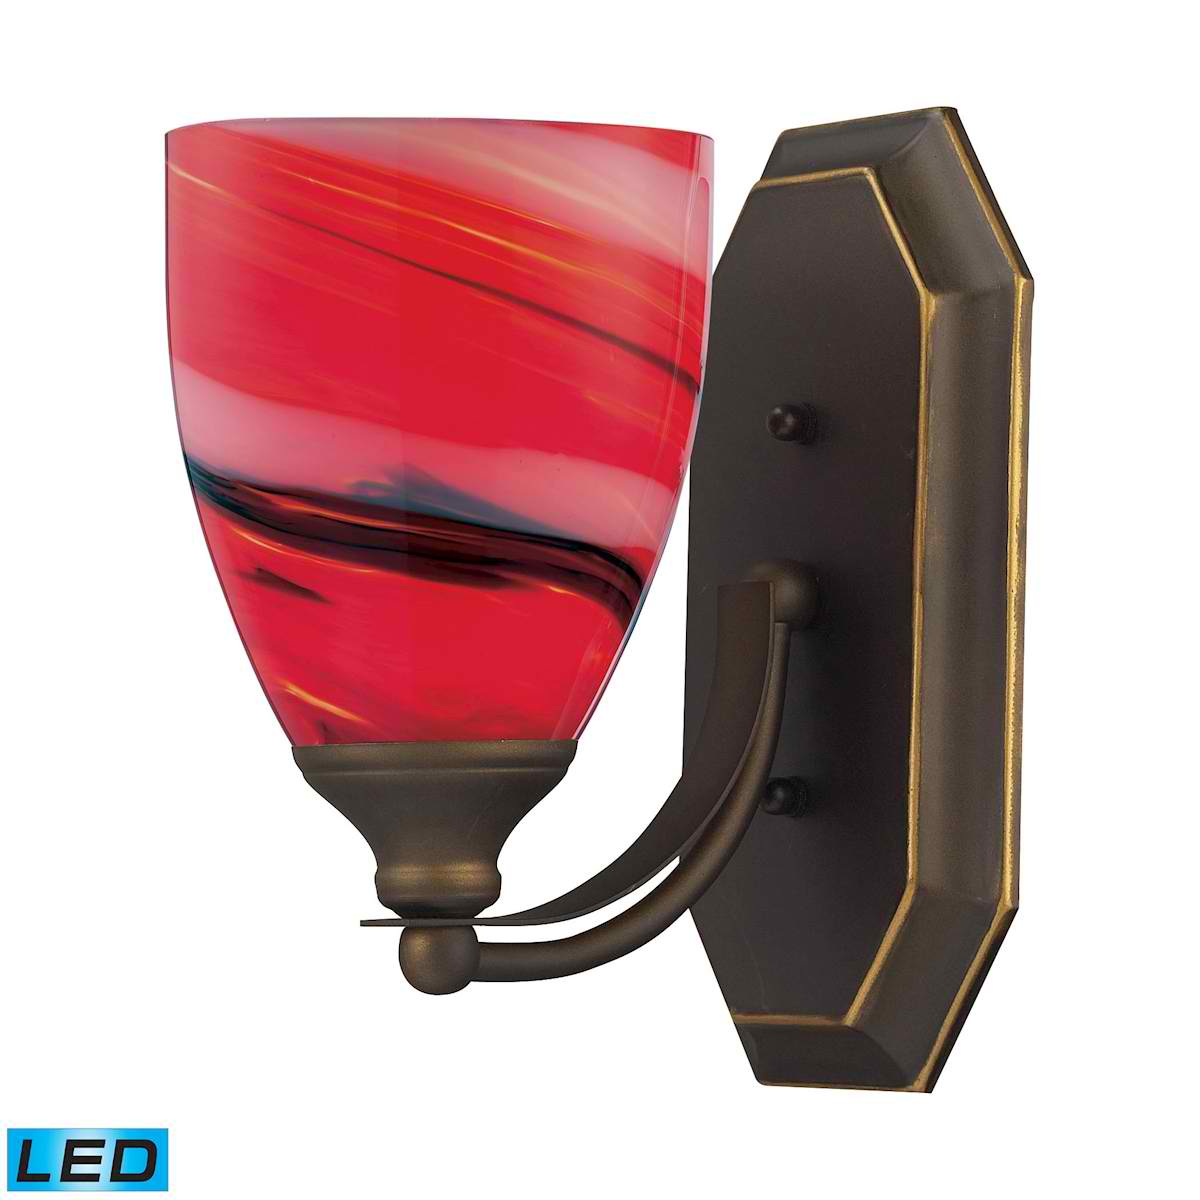 1 Light Vanity in Aged Bronze and Candy Glass - LED Offering Up To 800 Lumens (60 Watt Equivalent)